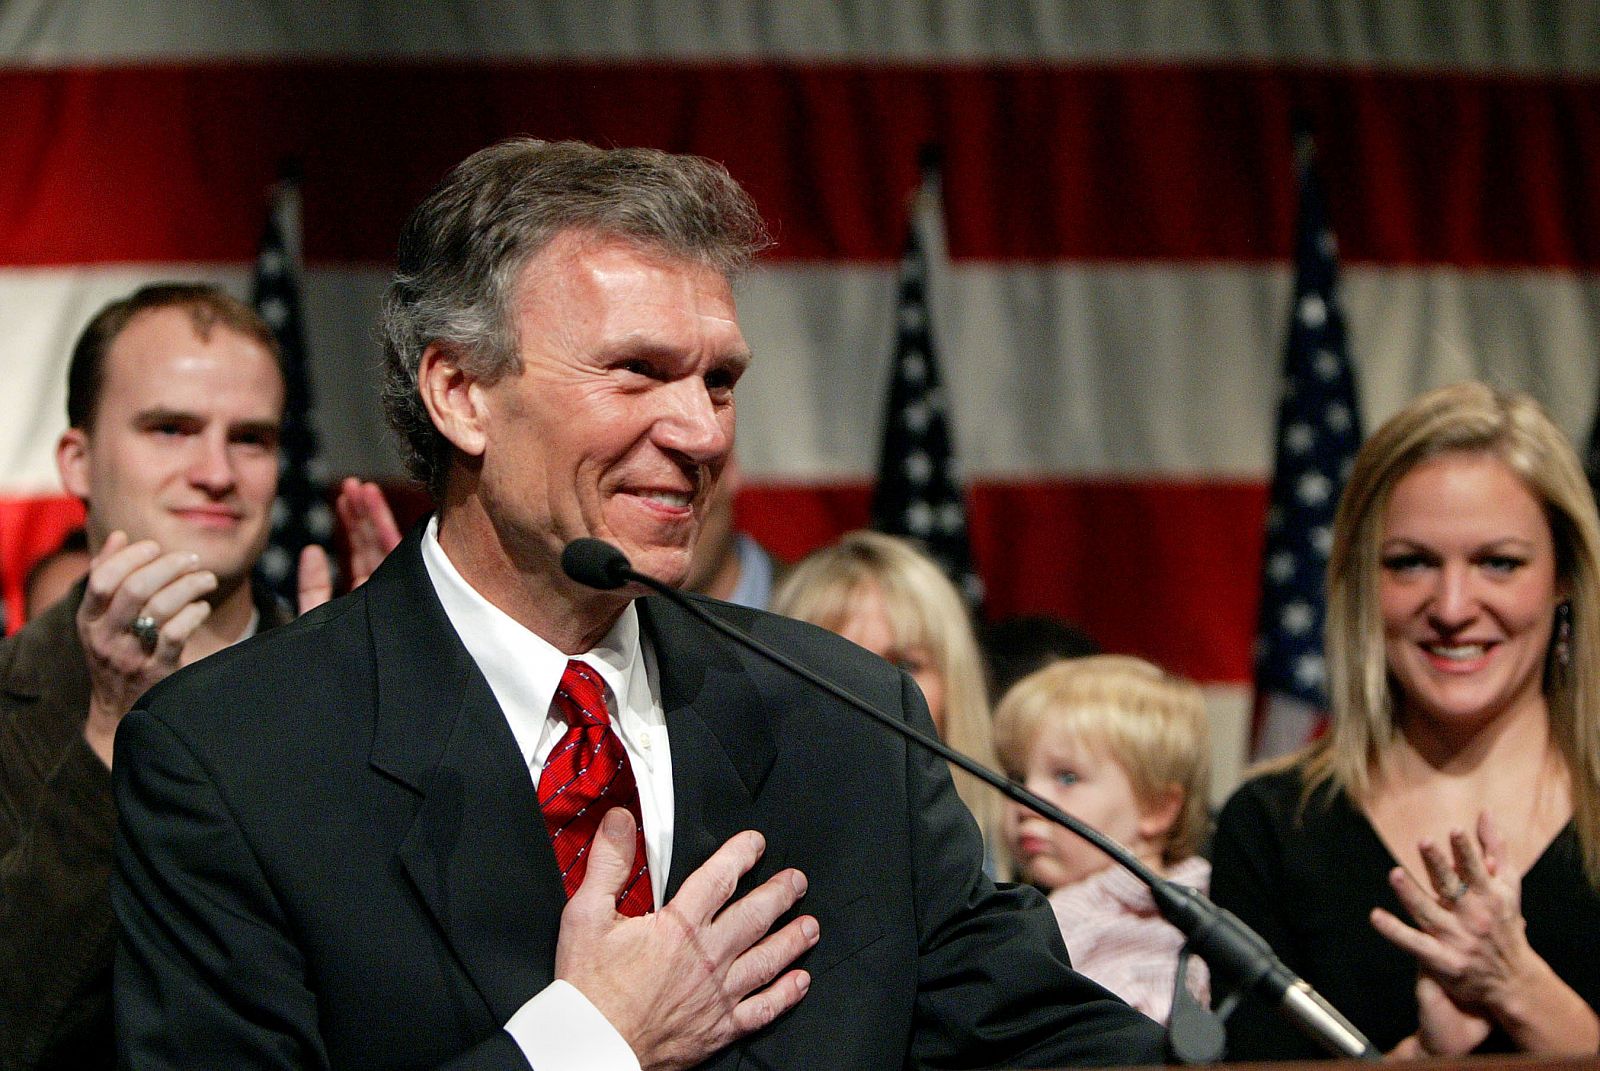 Senator Tom Daschle thanks his supporters after conceding defeat in his re election bid.